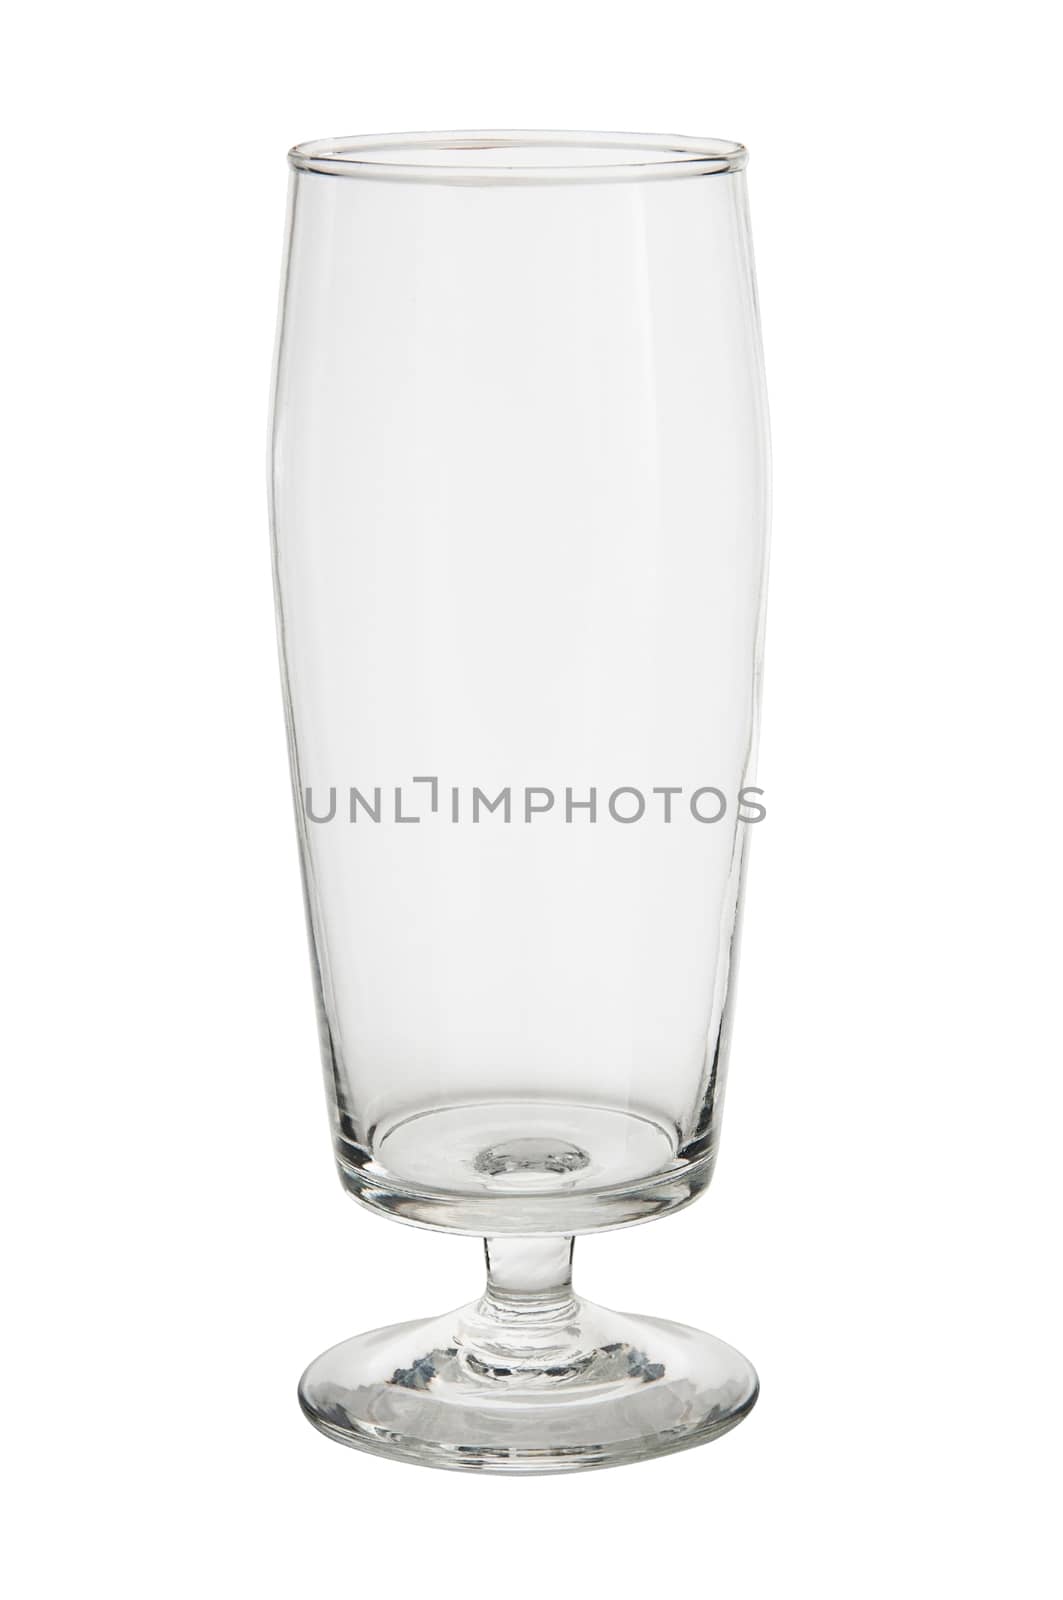 Empty glass isolated on a white background with clipping path